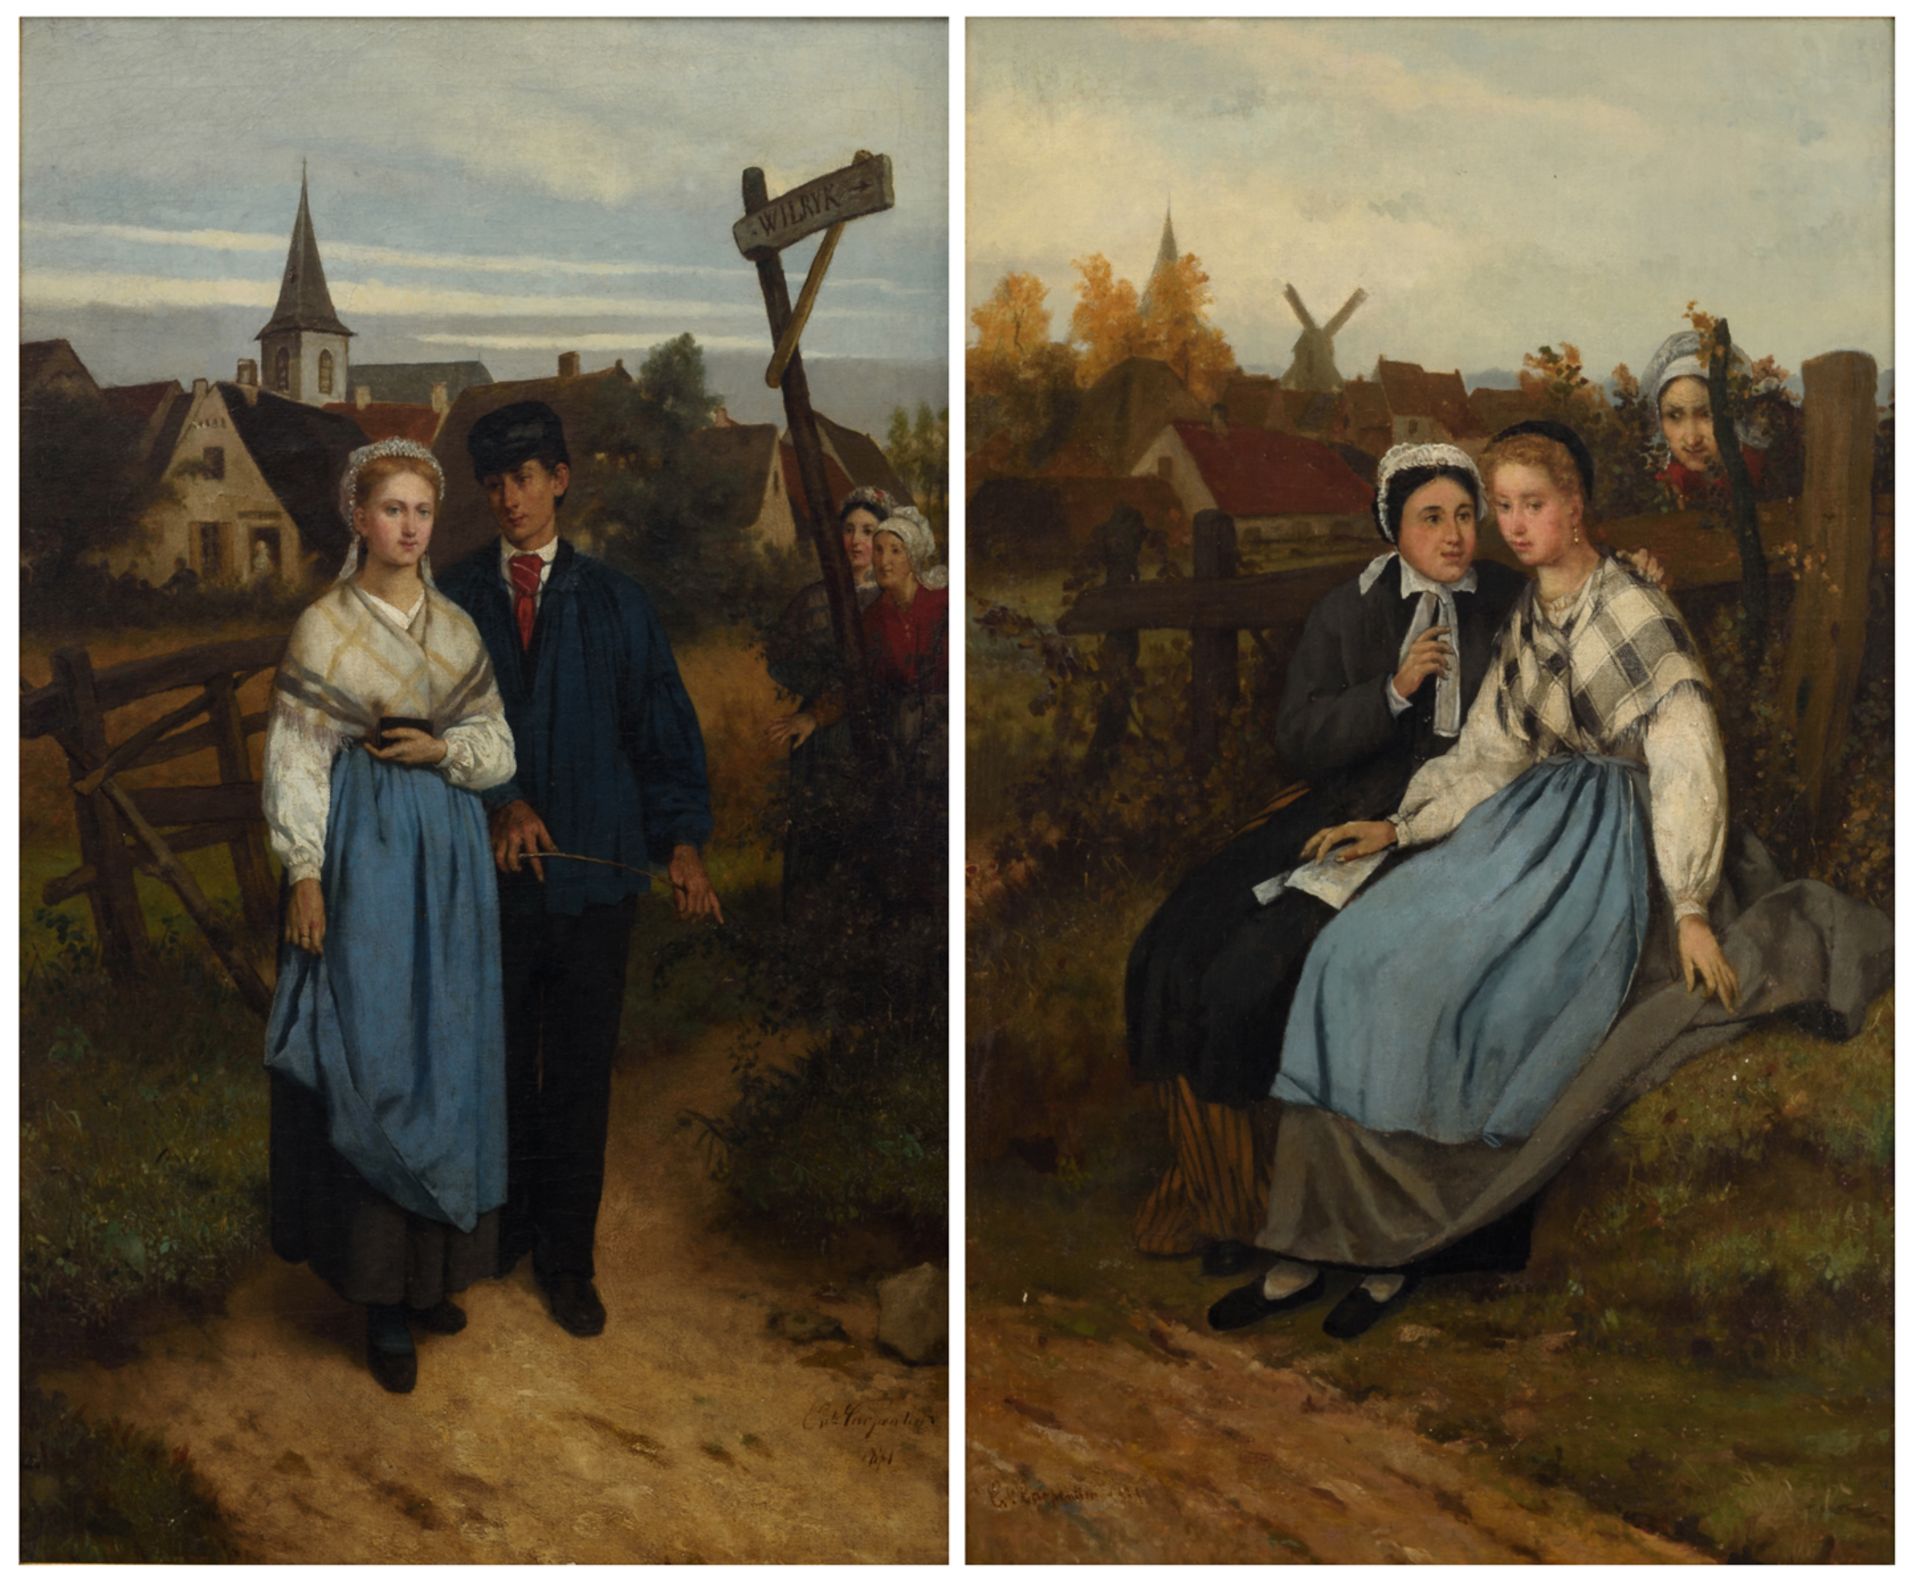 Carpentier E., two episodes of a rural love story, dated 1871, oil on canvas, part of the